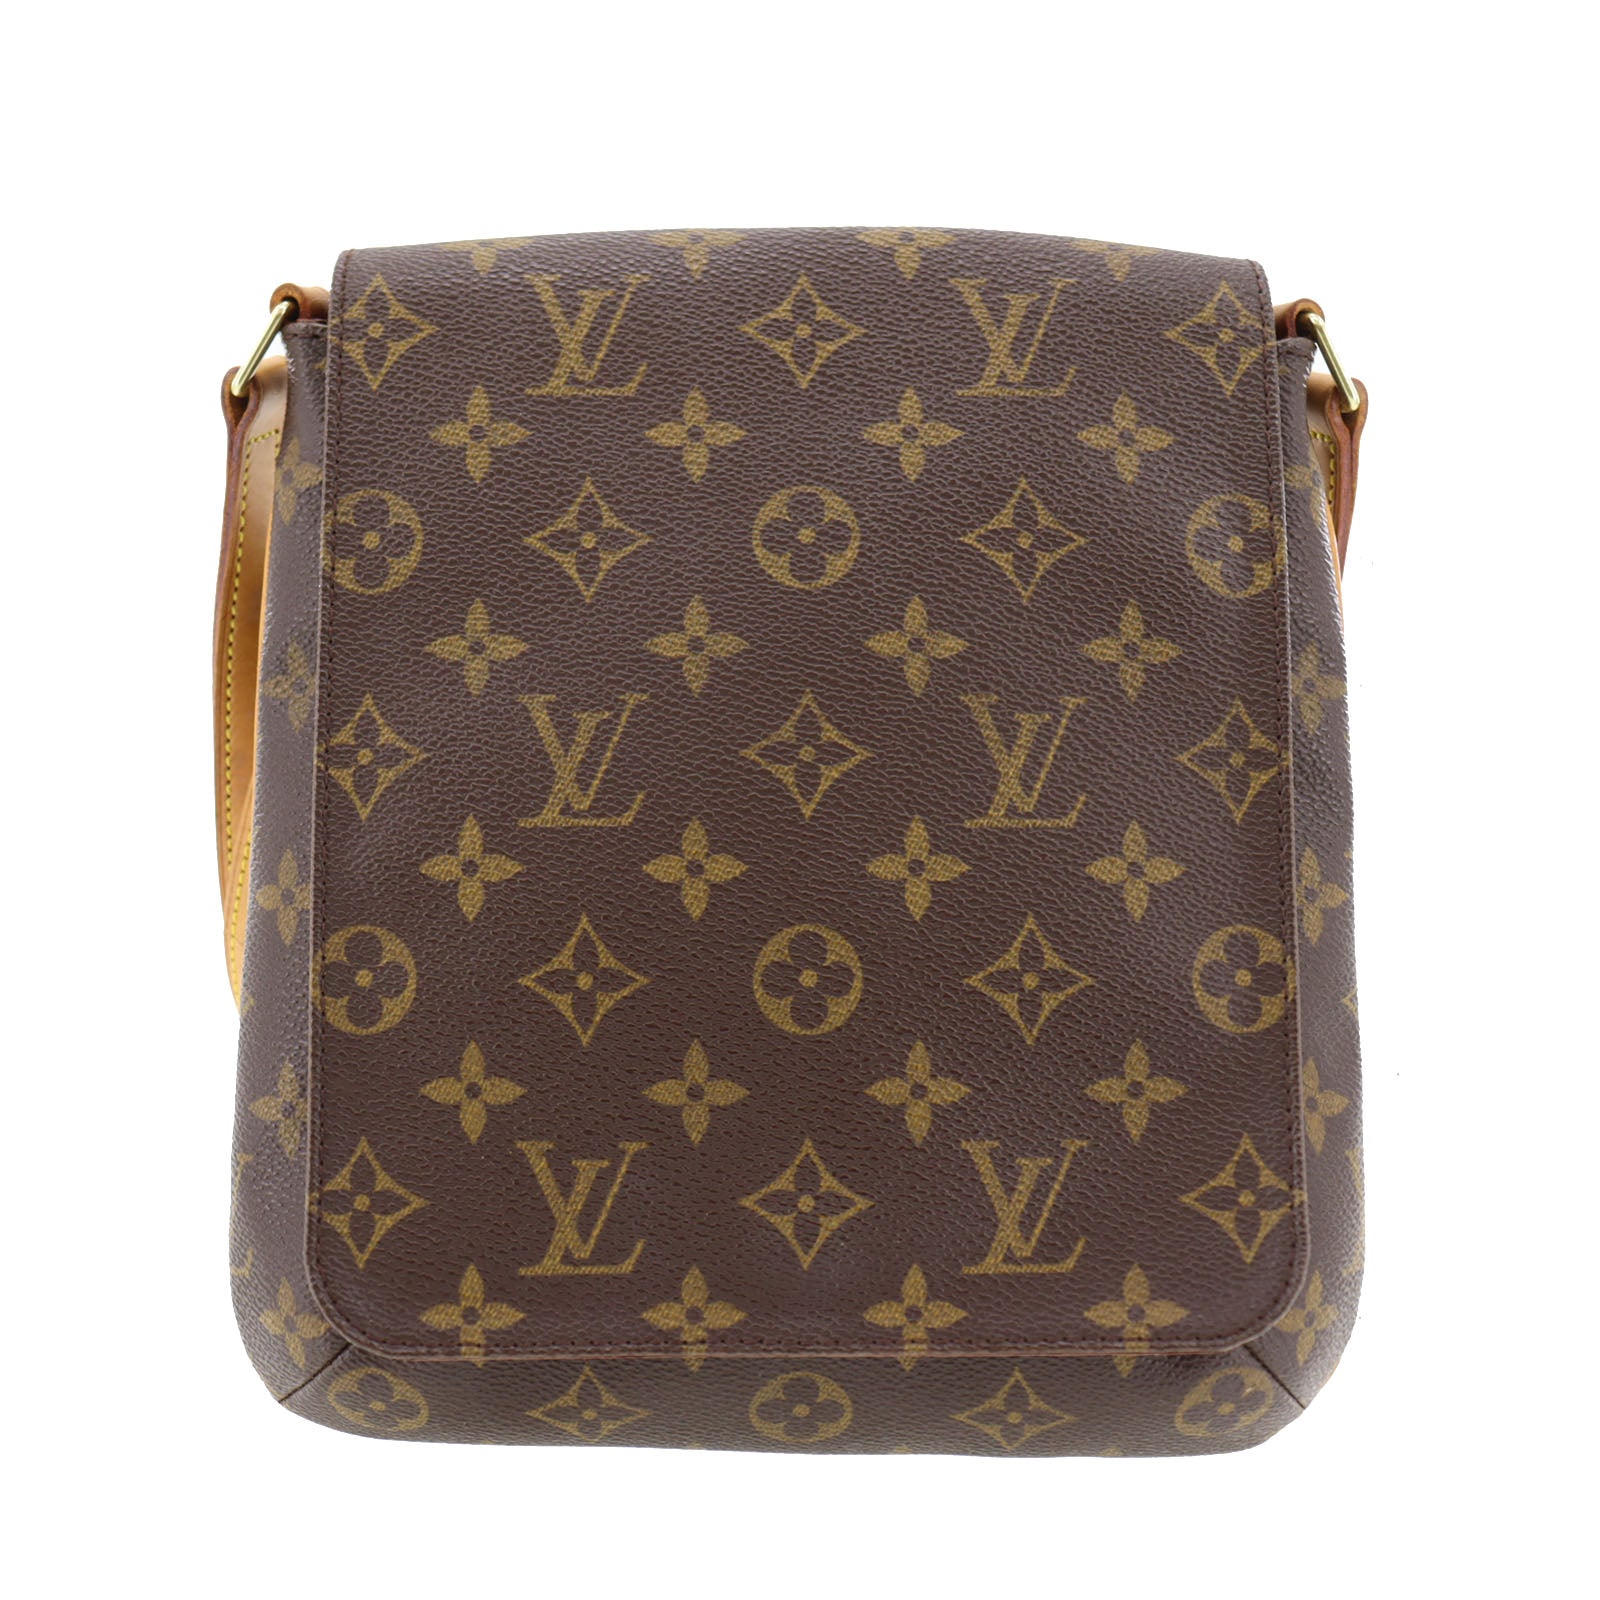 Buy Free Shipping [Used] LOUIS VUITTON Musette Salsa Shoulder Bag Short  Strap Monogram M51258 from Japan - Buy authentic Plus exclusive items from  Japan